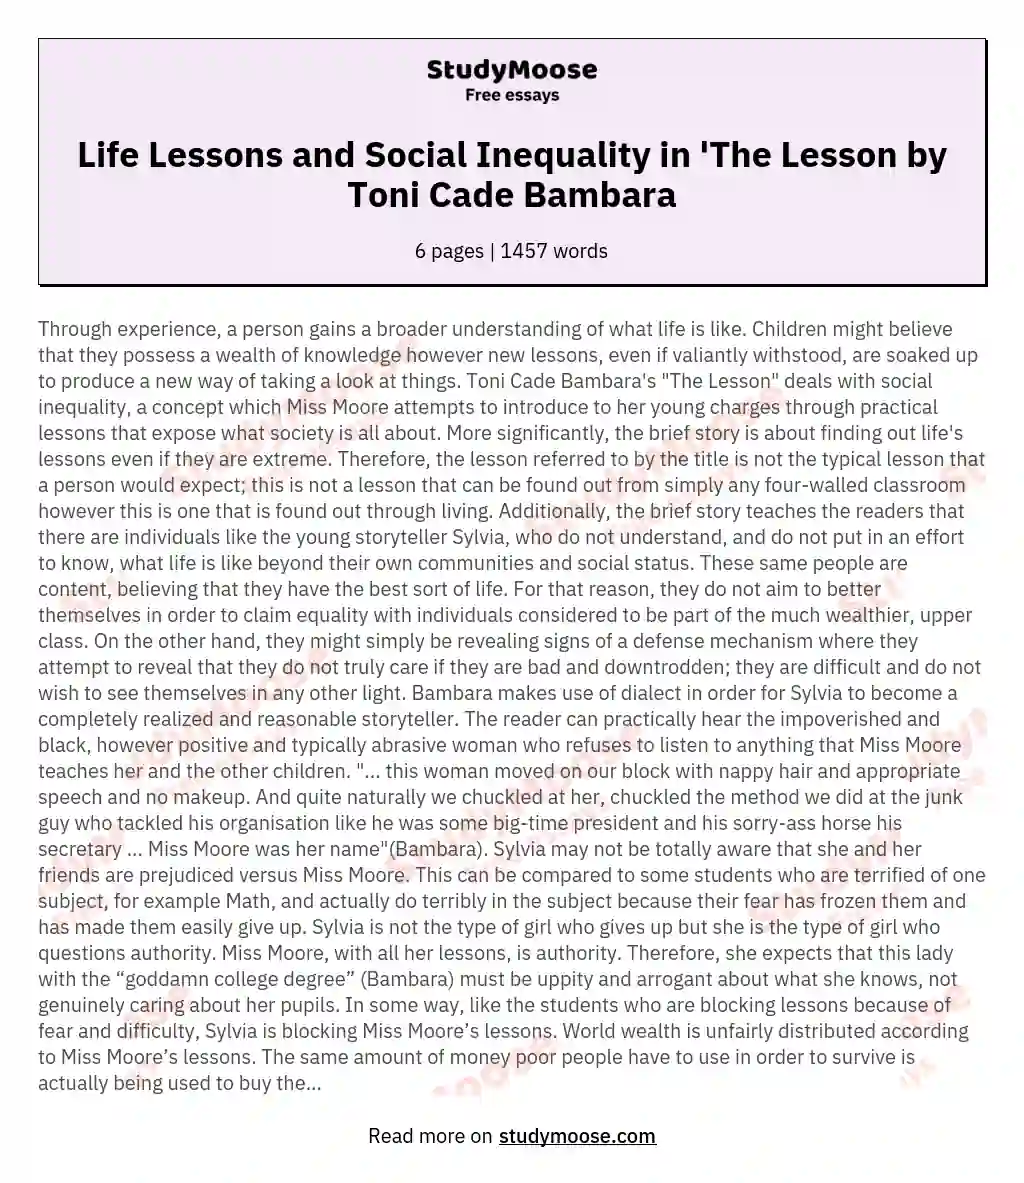 Life Lessons and Social Inequality in 'The Lesson by Toni Cade Bambara essay